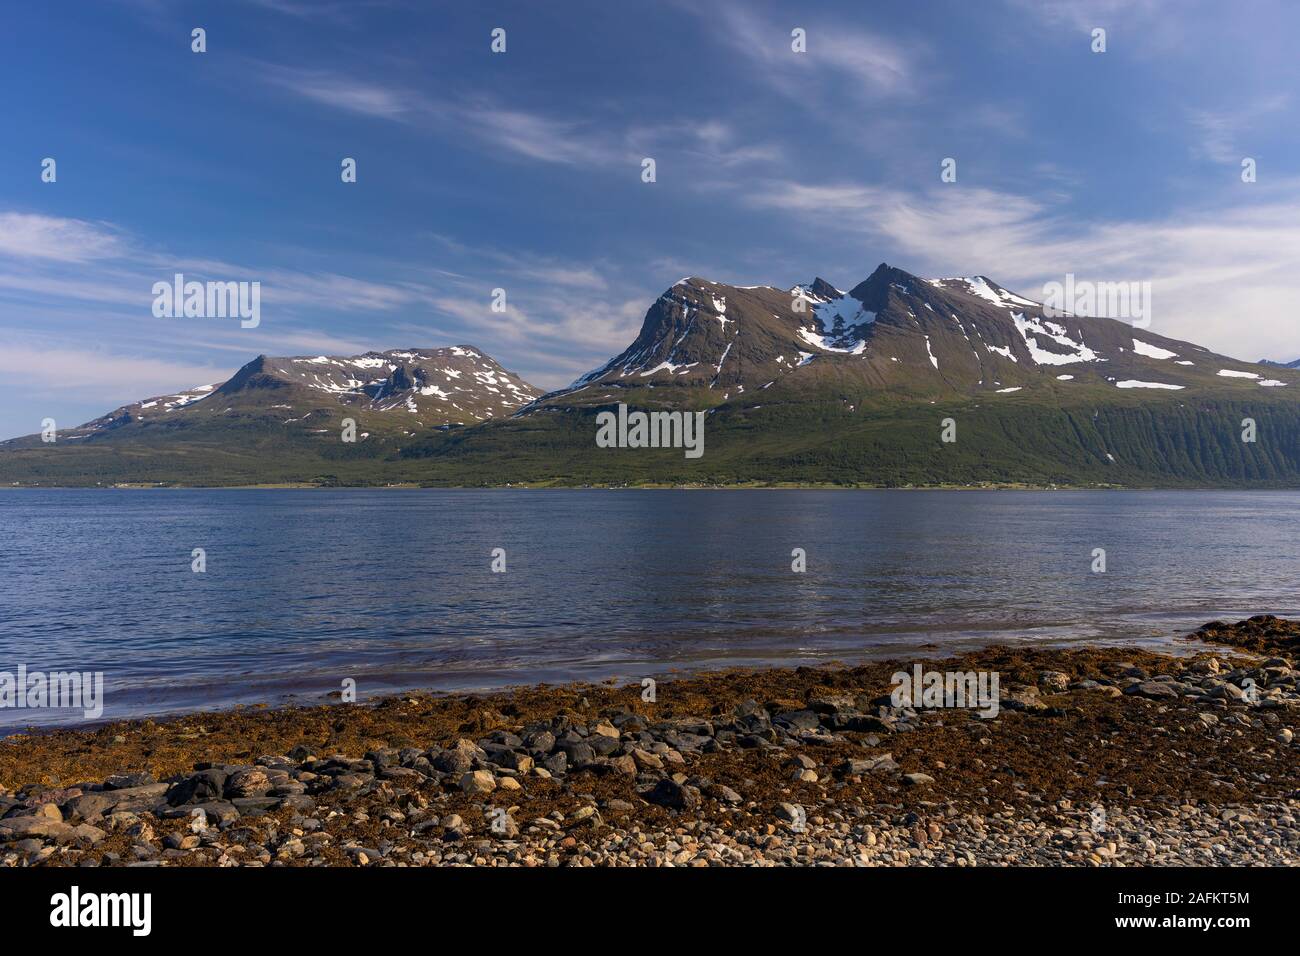 BAKKEJORD, KVALØYA ISLAND, NORWAY - Kvaløya Island beach, foreground, and view of  Straumsfjorden fjord and mountains. Stock Photo